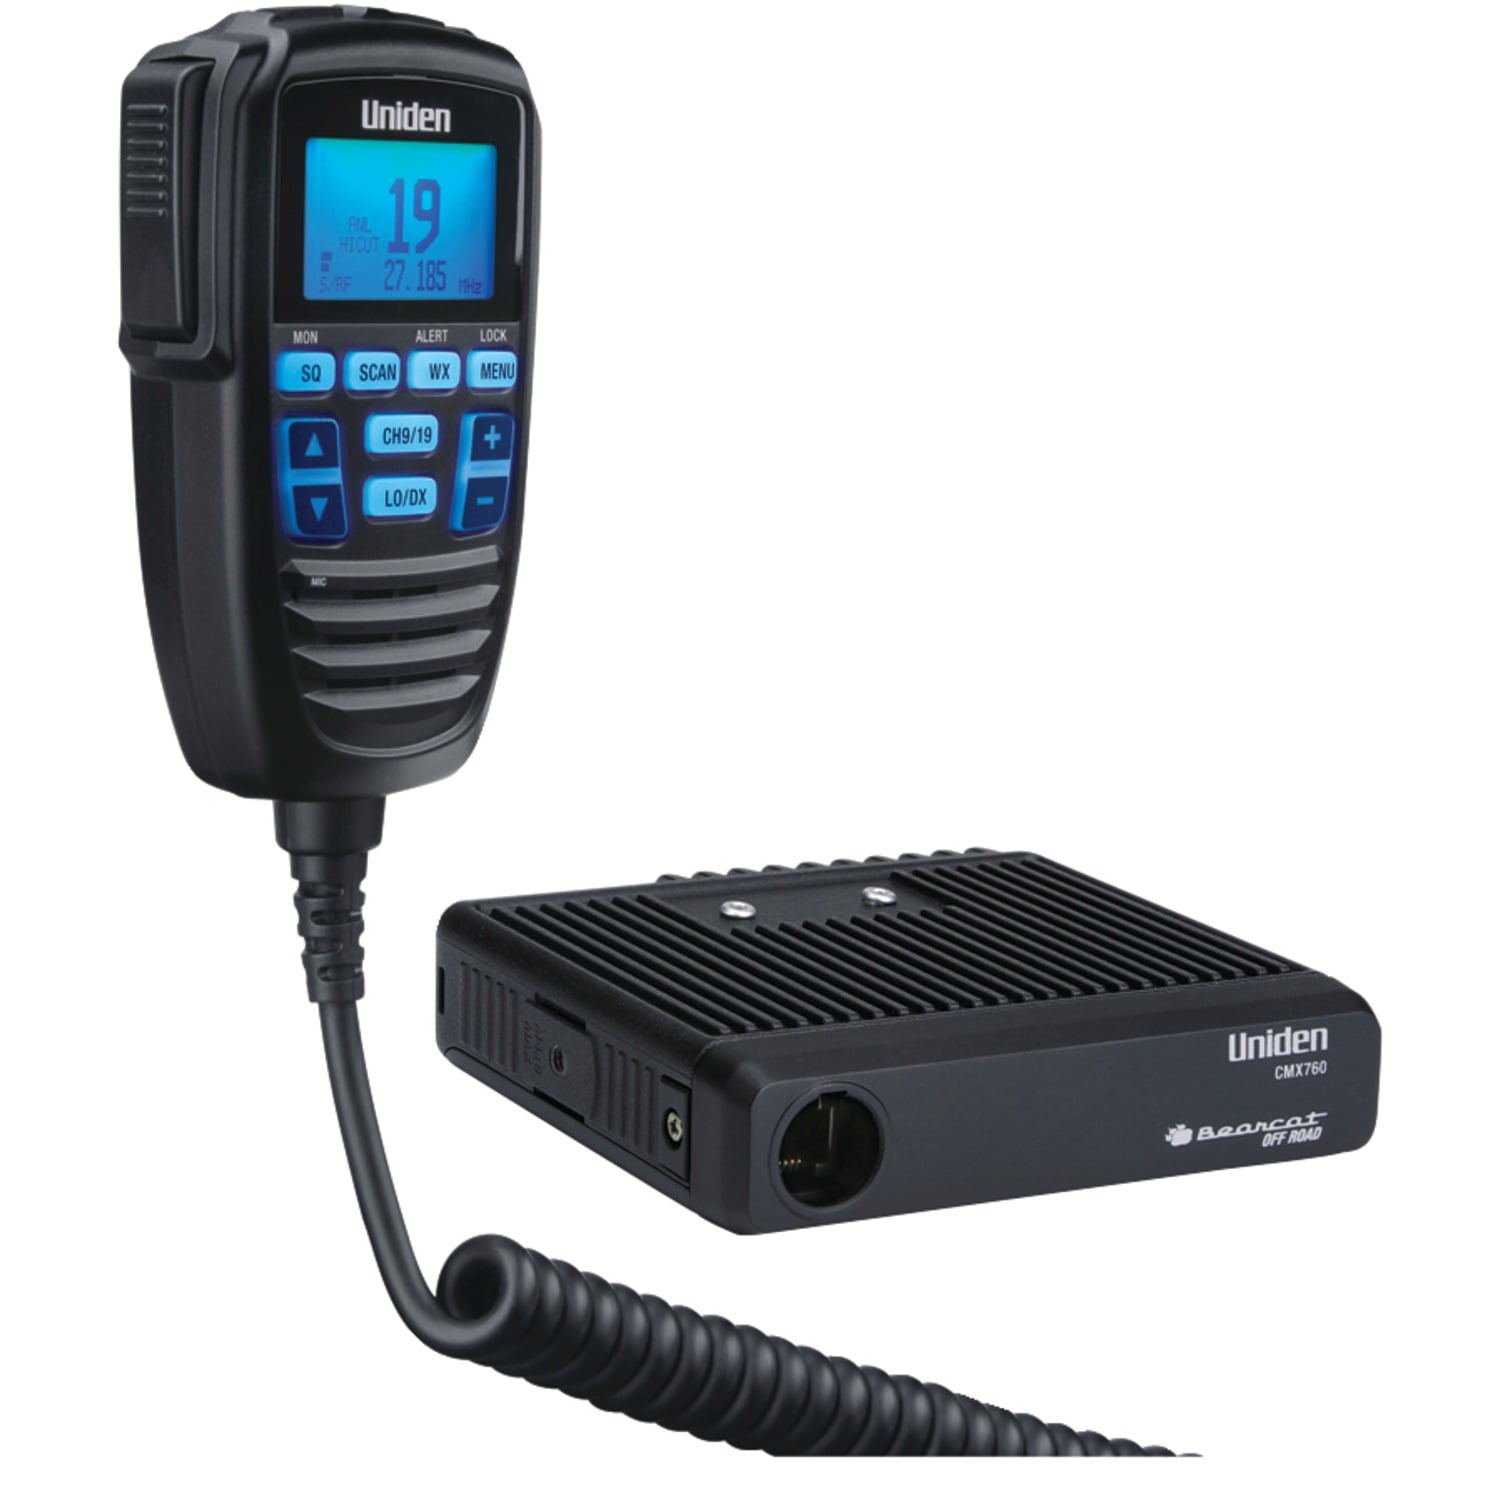 Reviews for Uniden CB Radio with SSB